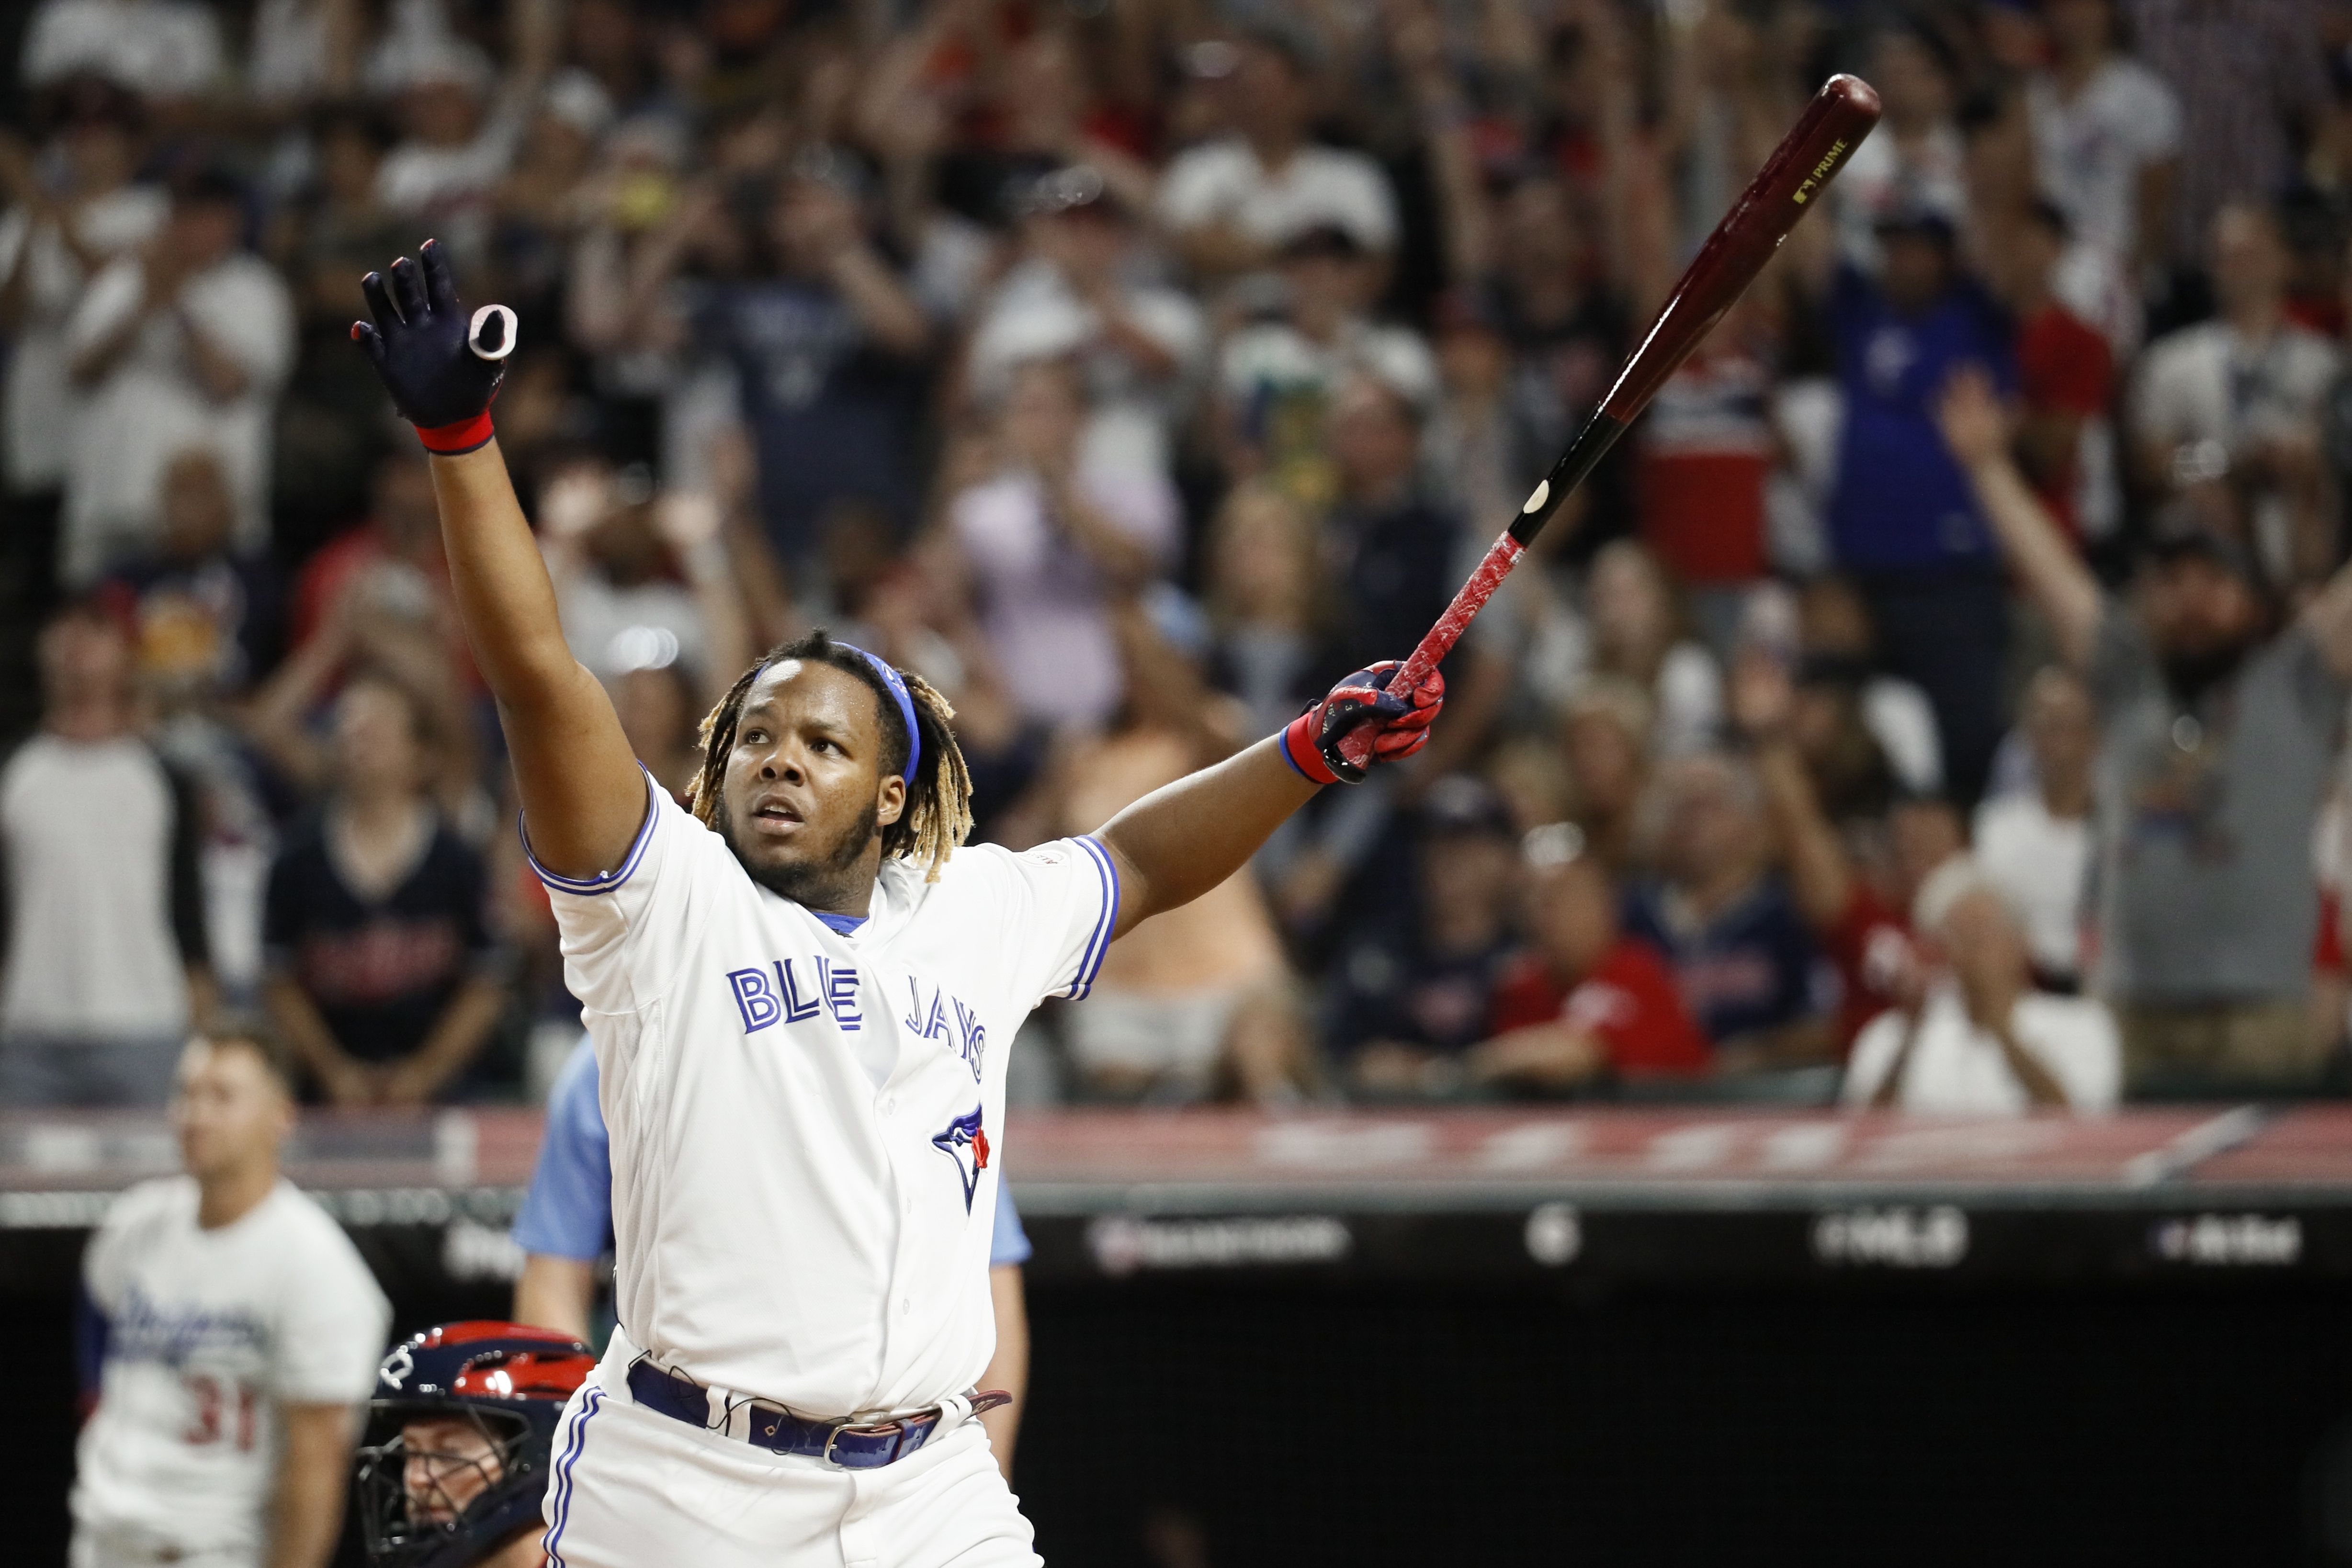 Vladimir Guerrero Jr. Home Run Derby Odds: Guerrero Given Nearly 22% Chance  to Win 2023 Home Run Derby